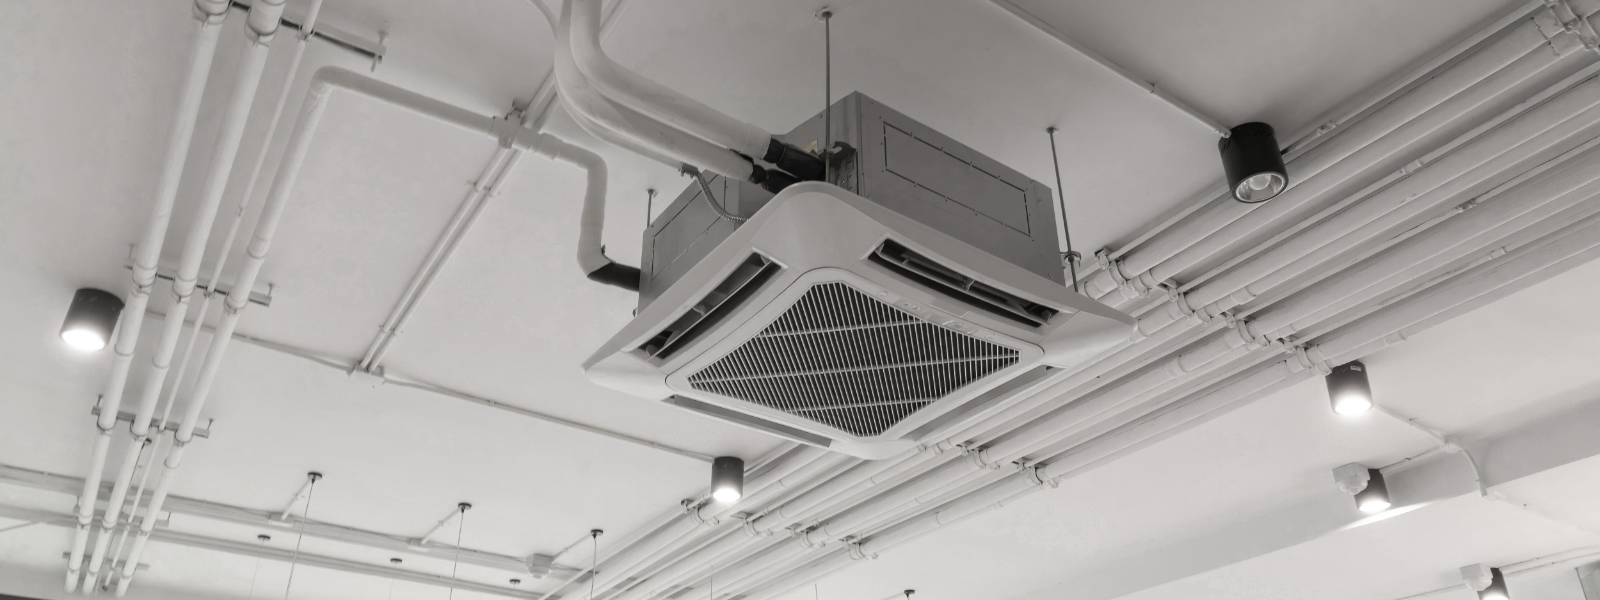 VECASERV OÜ - design and maintenance of ventilation systems, ventilation equipment sales, condomsons and air heat pumps, ...